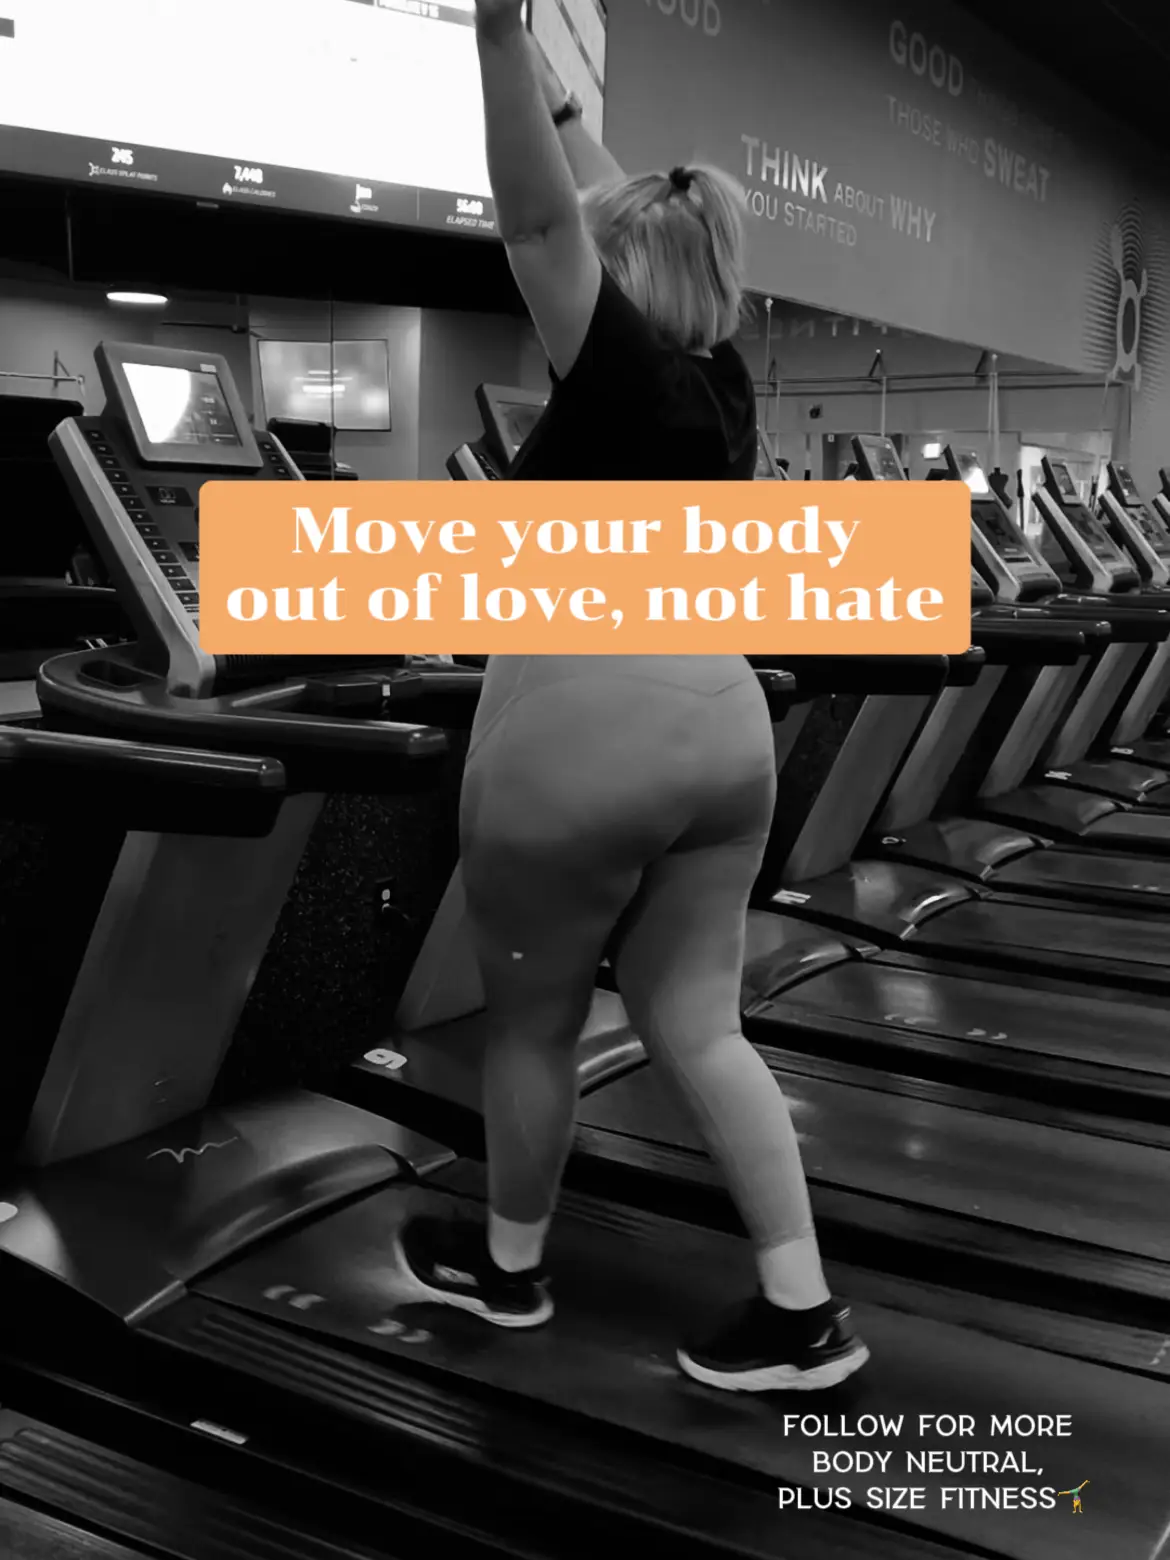 move your body because you love it, not because you hate it